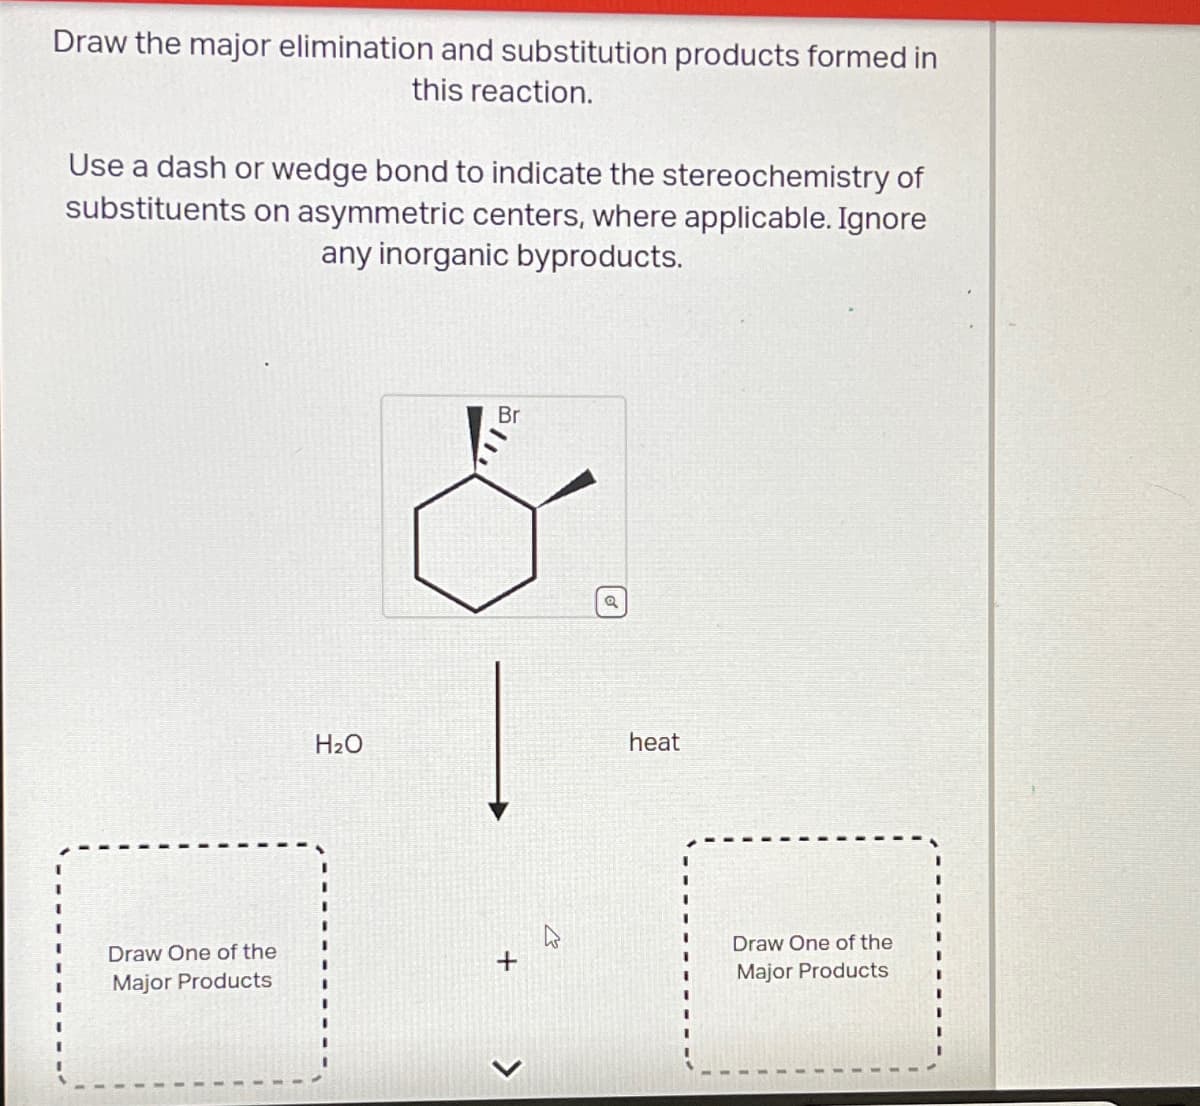 Draw the major elimination and substitution products formed in
this reaction.
Use a dash or wedge bond to indicate the stereochemistry of
substituents on asymmetric centers, where applicable. Ignore
any inorganic byproducts.
H₂O
Br
Draw One of the
Major Products
+
>
a
heat
Draw One of the
Major Products